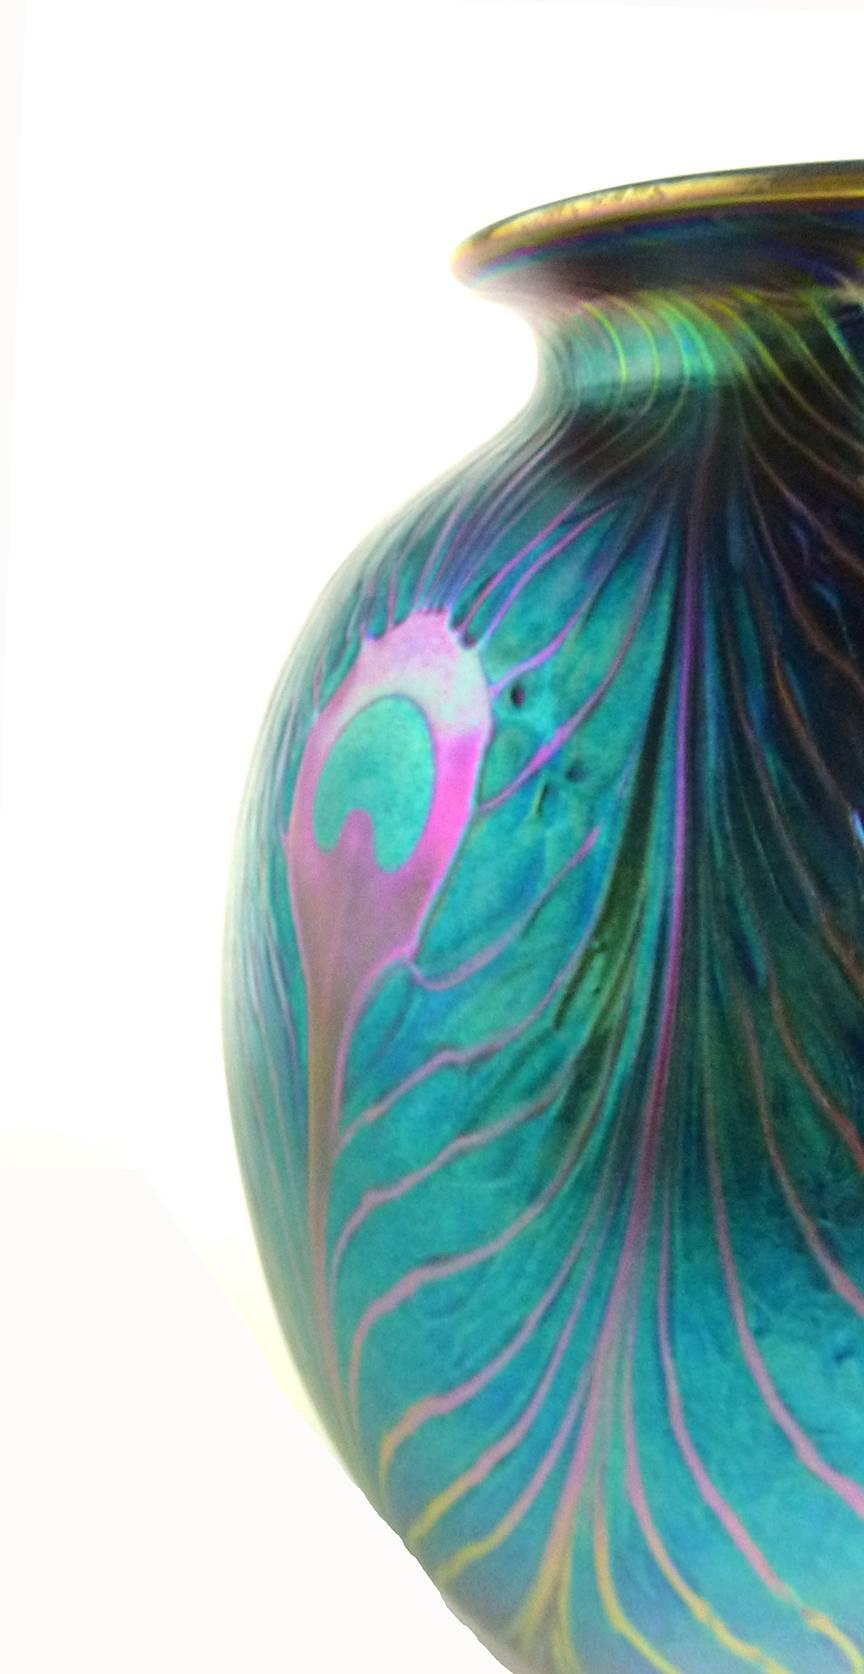 Egyptian Revival Charles Lotton Iridescent Blue Peacock Feather Studio Art Glass Vase For Sale